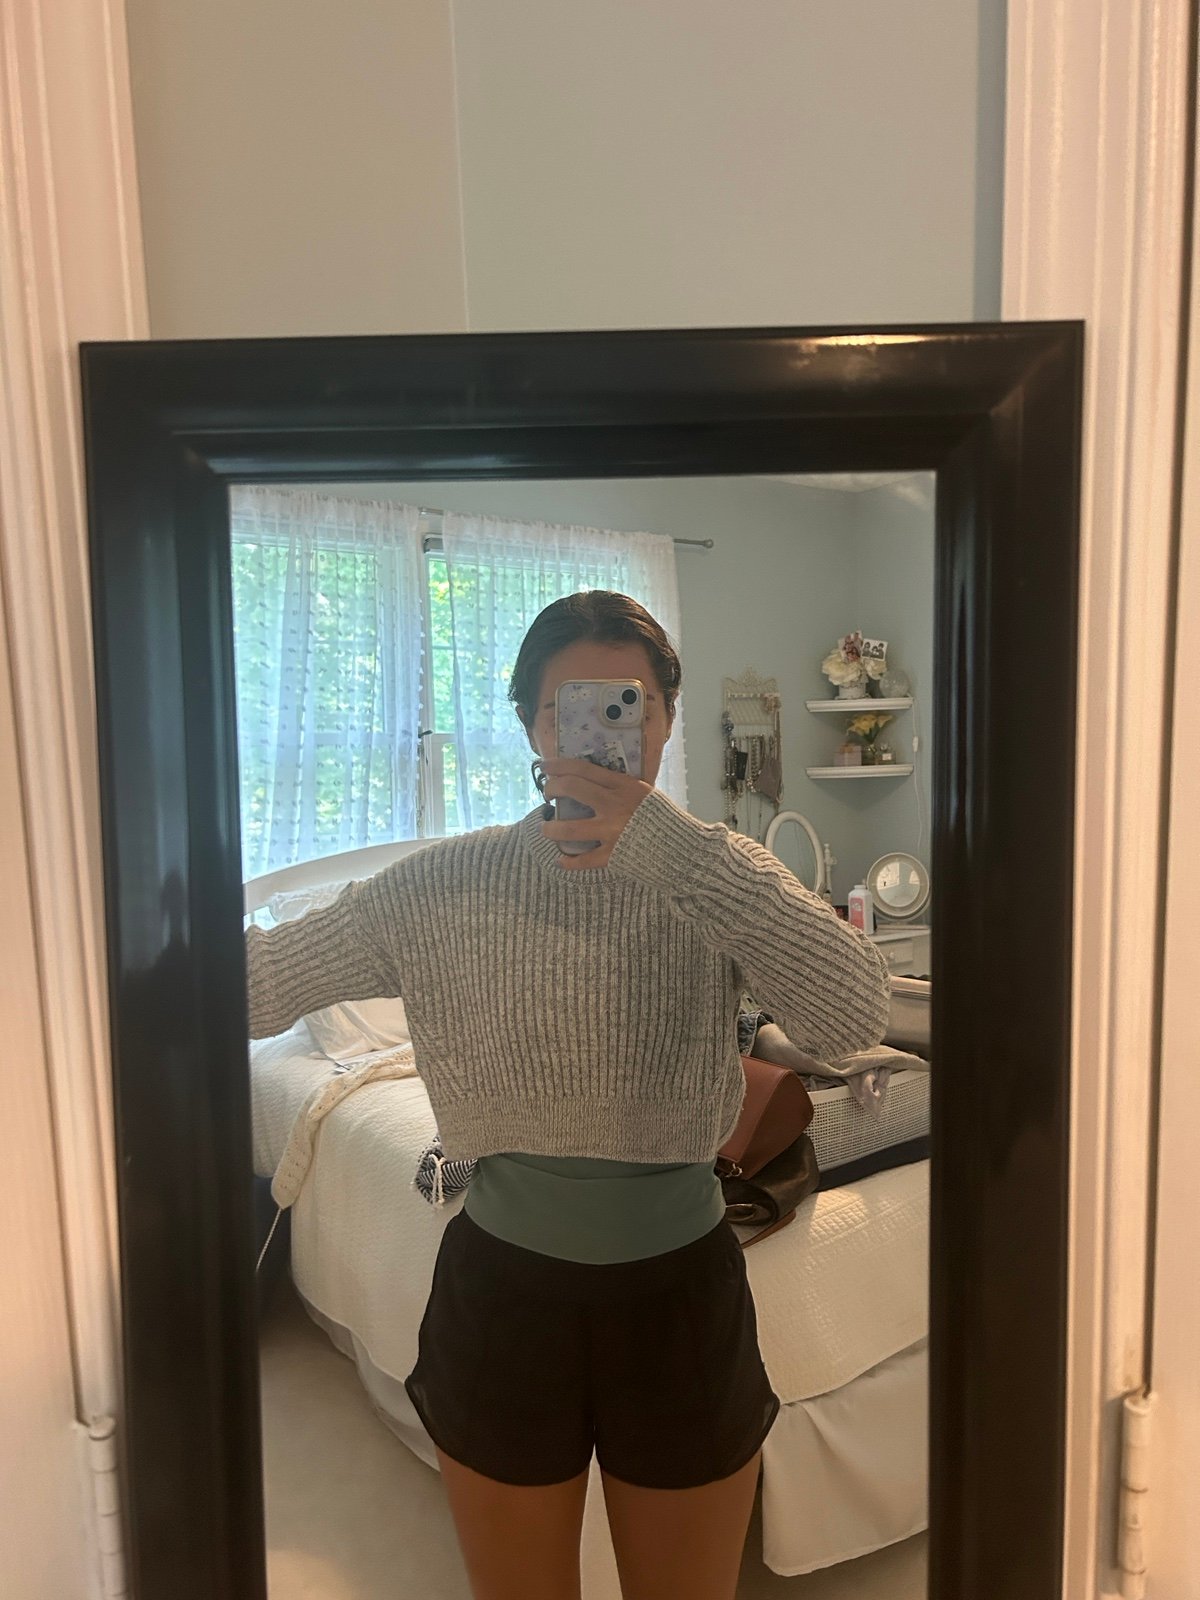 Discounted Urban Outfitters Cropped Sweater lBNTDlrKl for sale